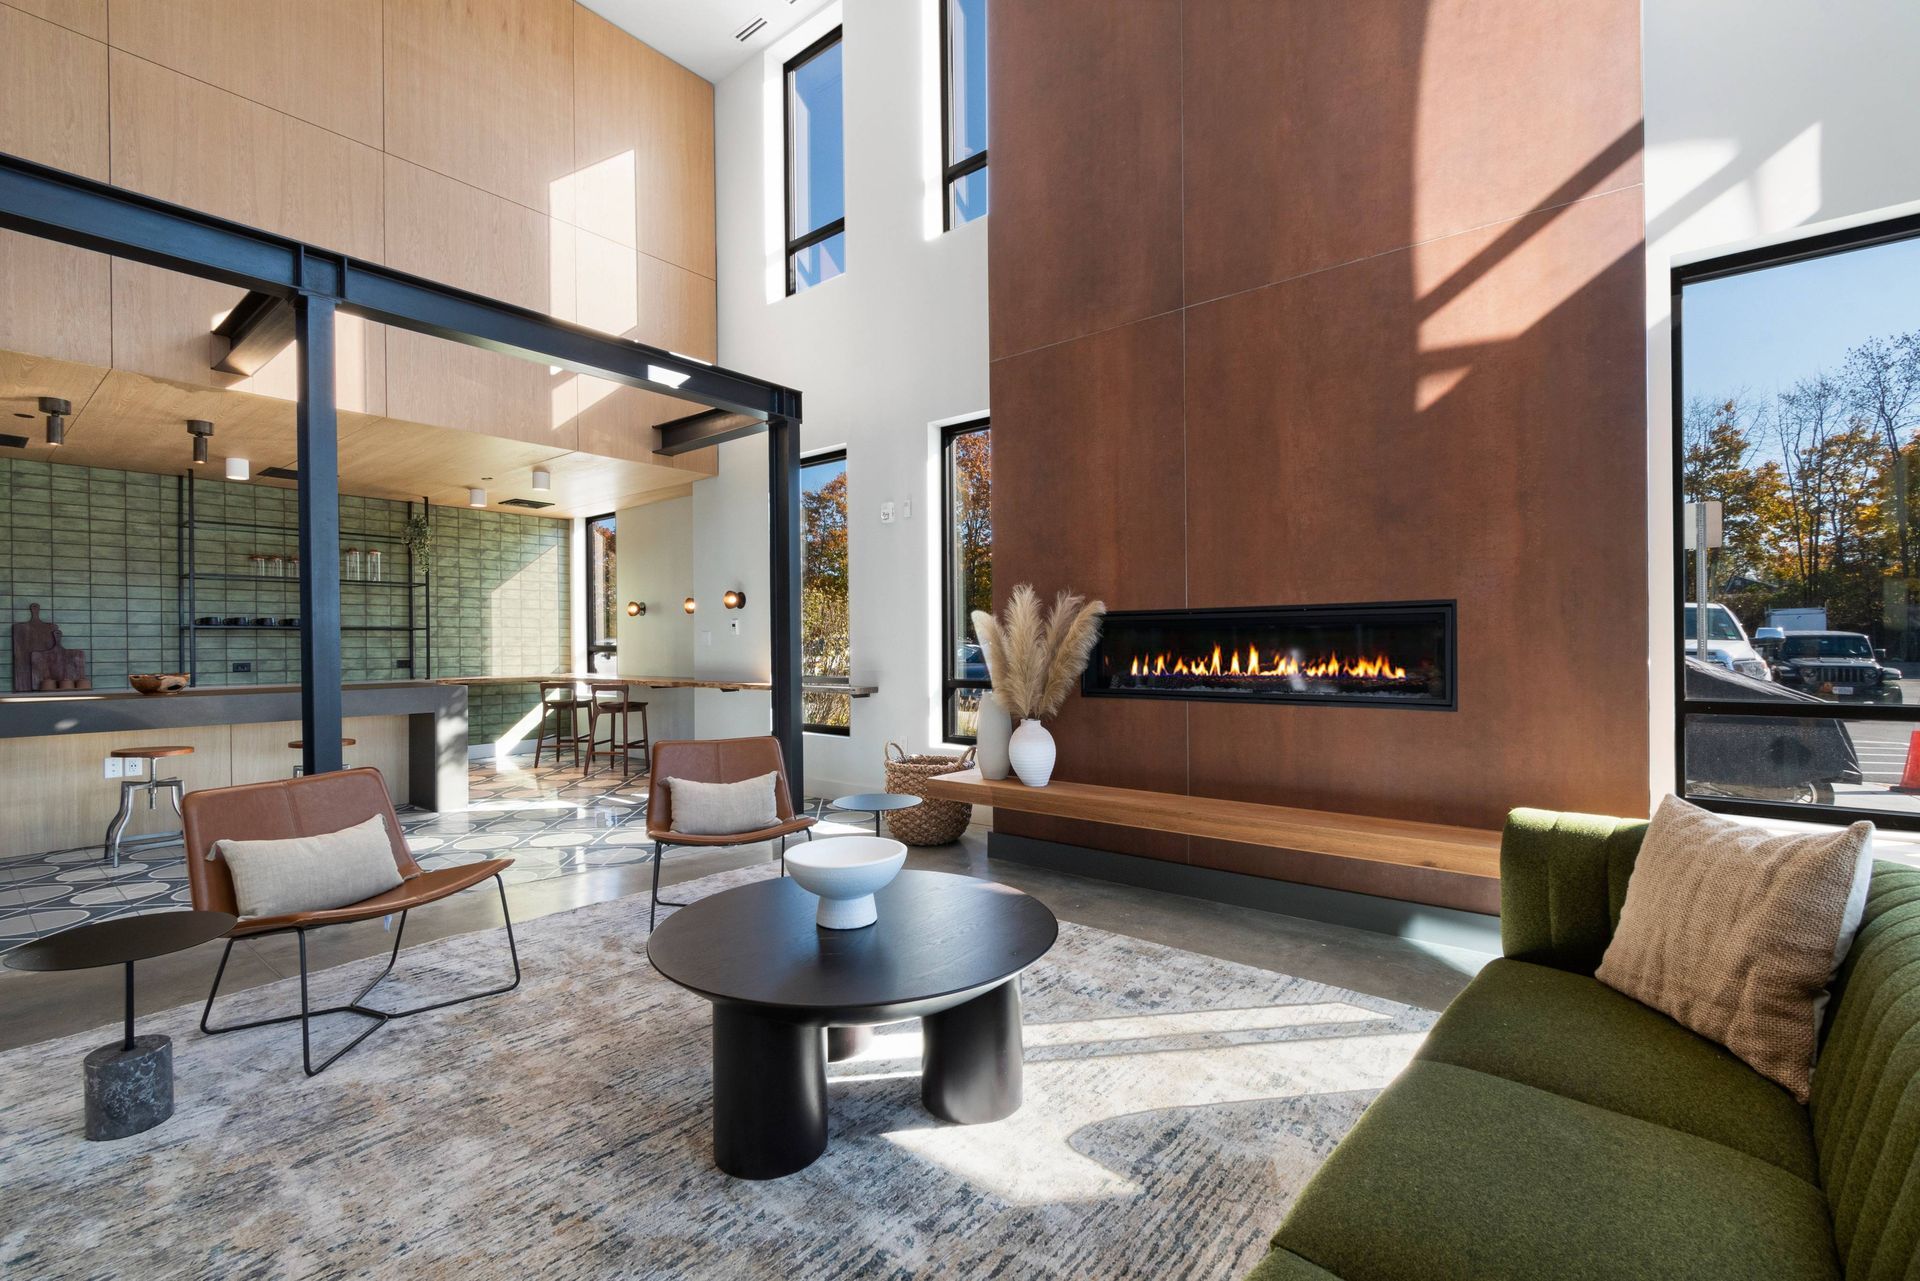 West End Yards clubhouse with fancy fire place and sofa.